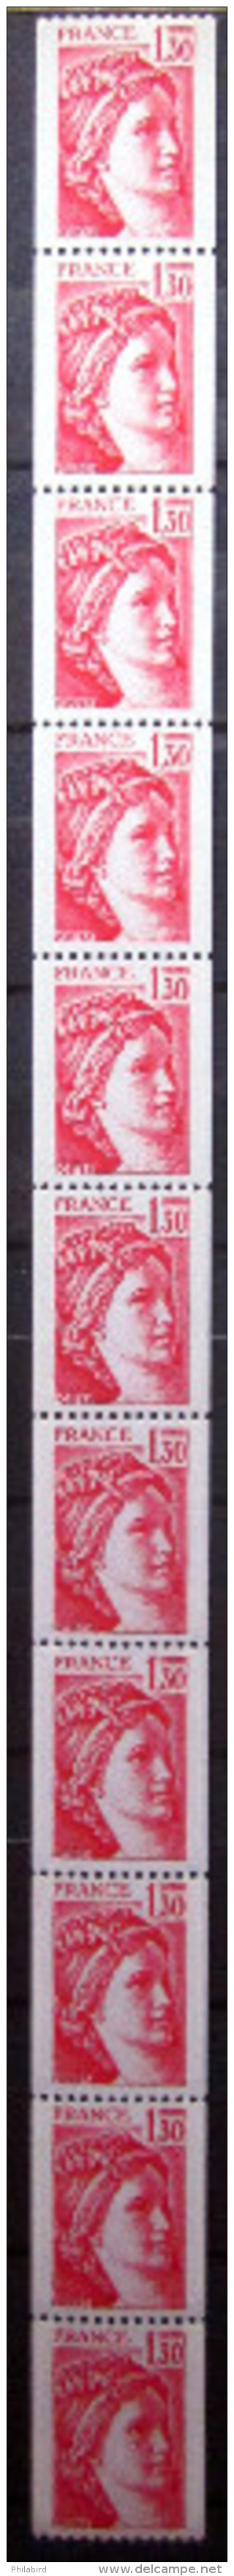 FRANCE            ROULETTE  74  (11 Timbres)            NEUF** - Coil Stamps